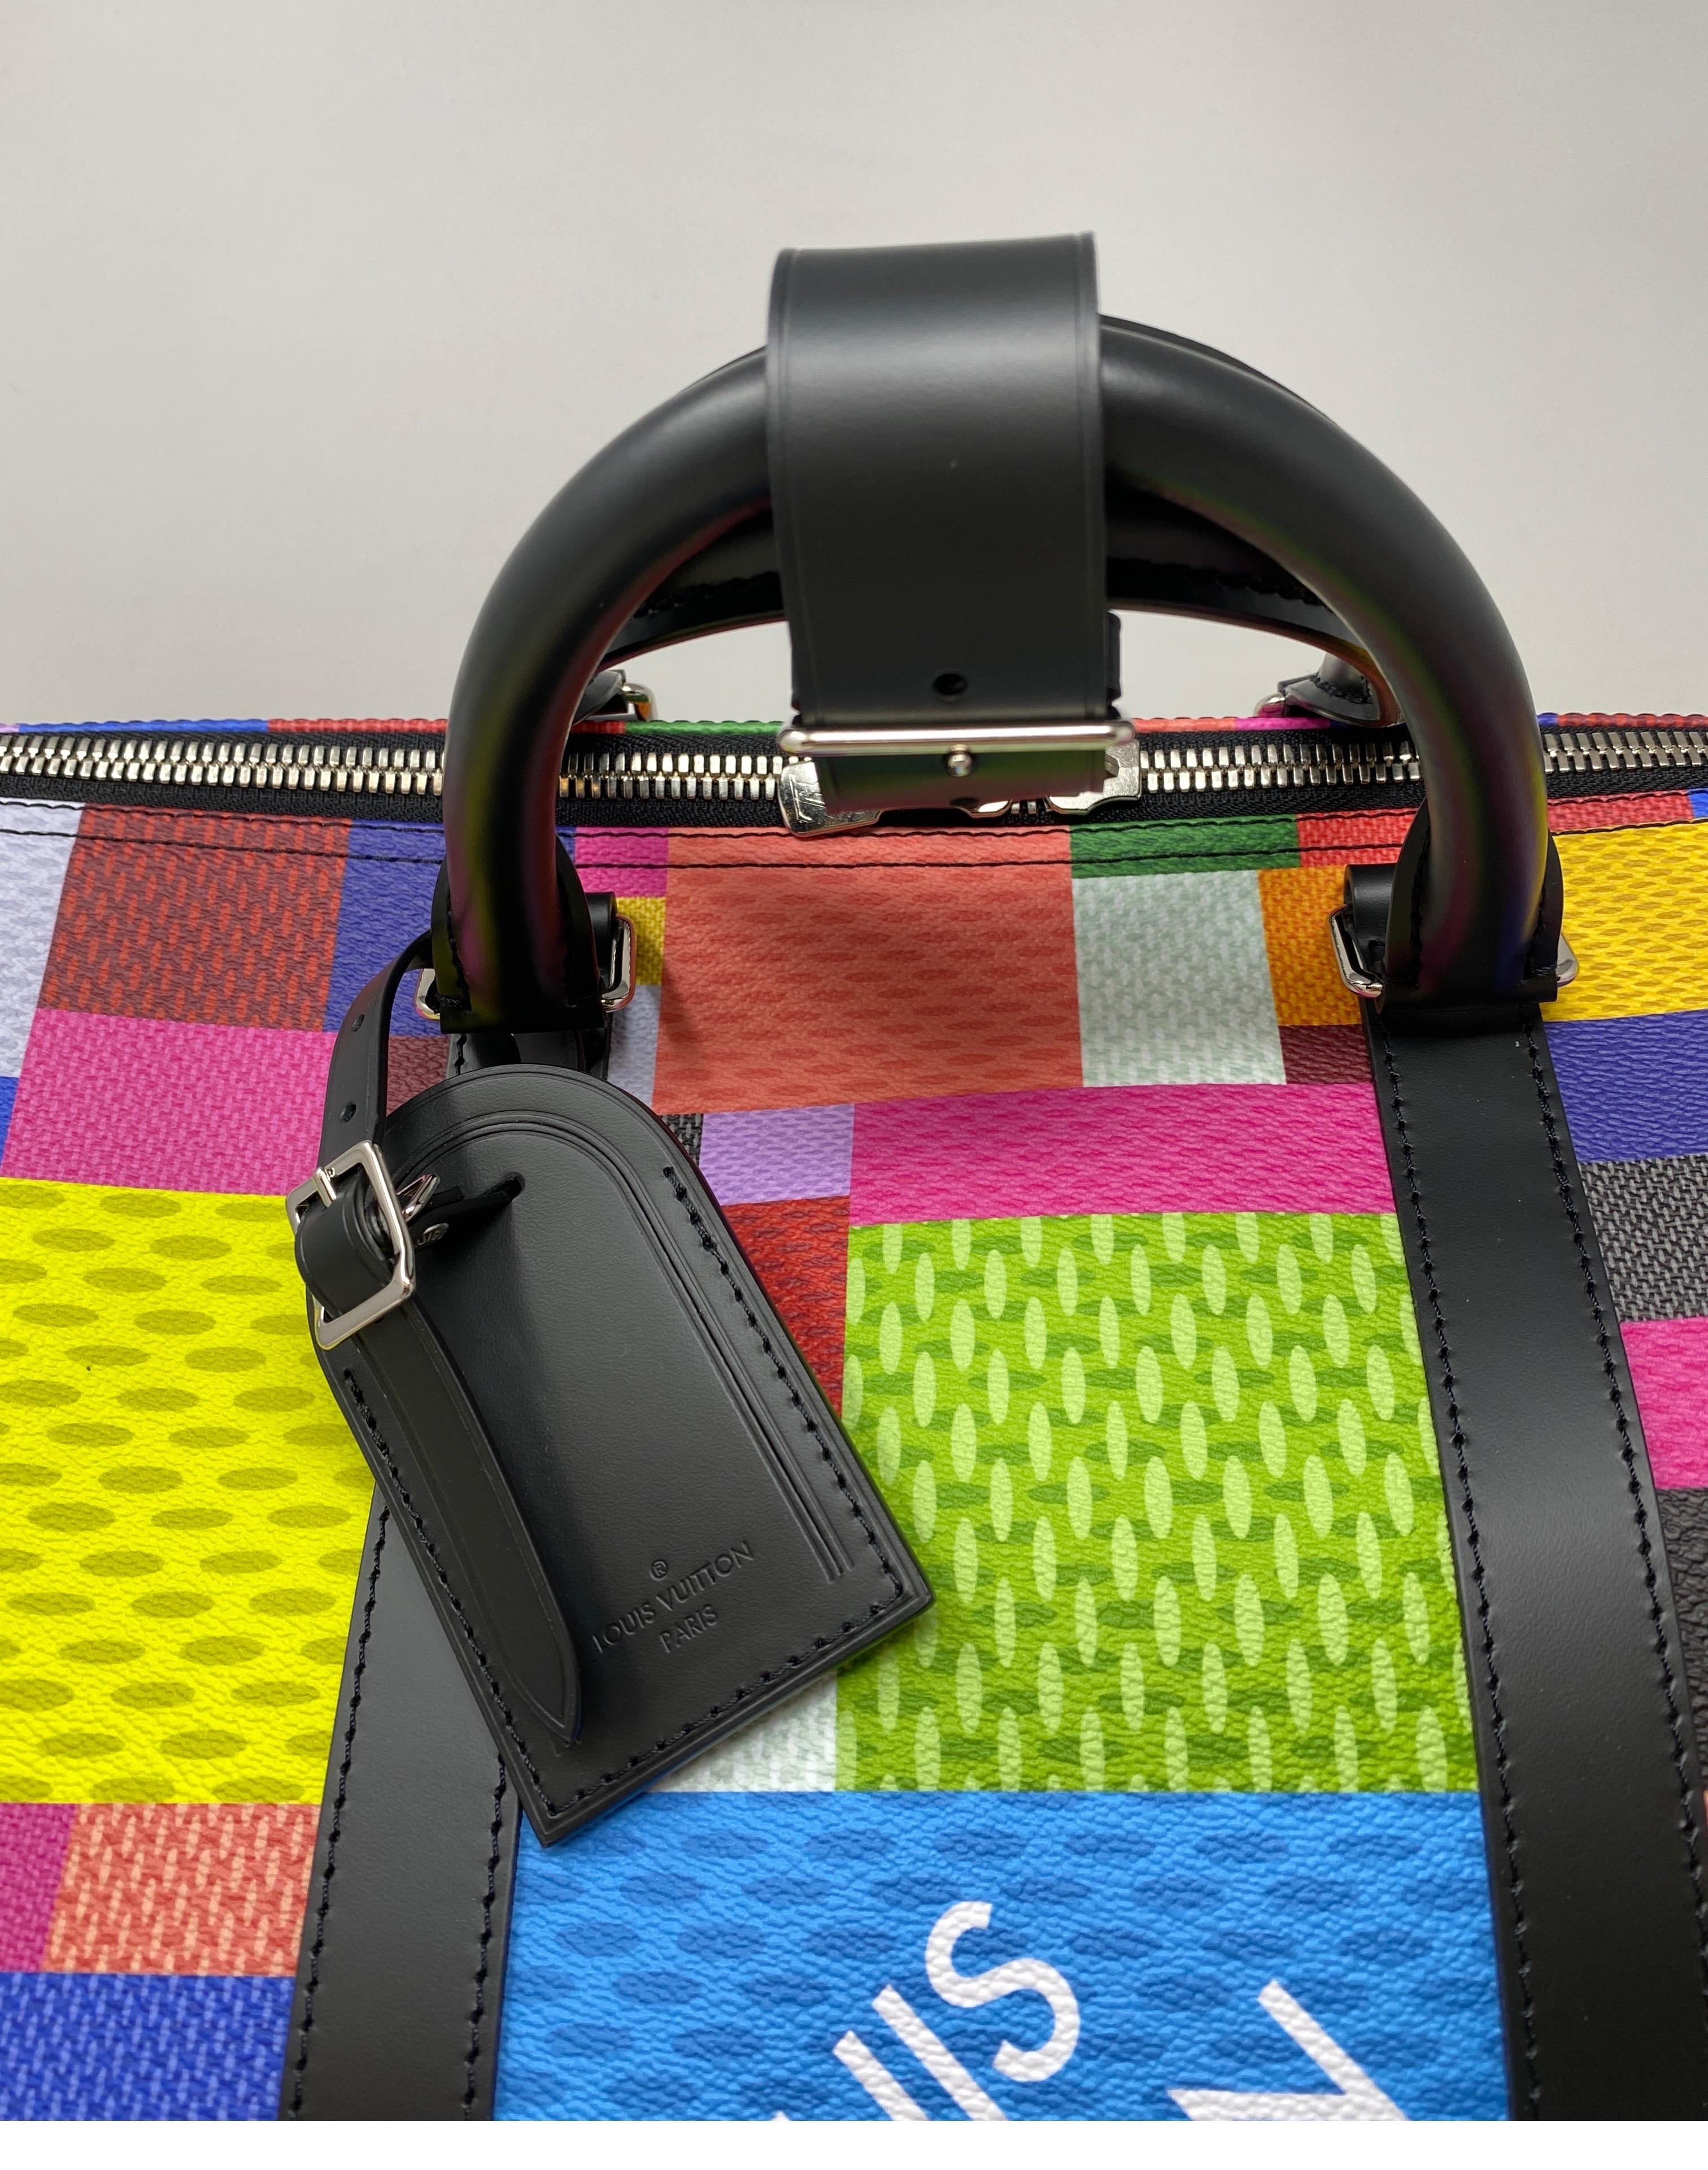 Louis Vuitton Multicolor Keepall 50 Bandouliere. Patchwork style design. Unique art style bag. Mint like new condition. Collector's piece. Includes strap, ID luggage, lock, and keys. Guaranteed authentic. 